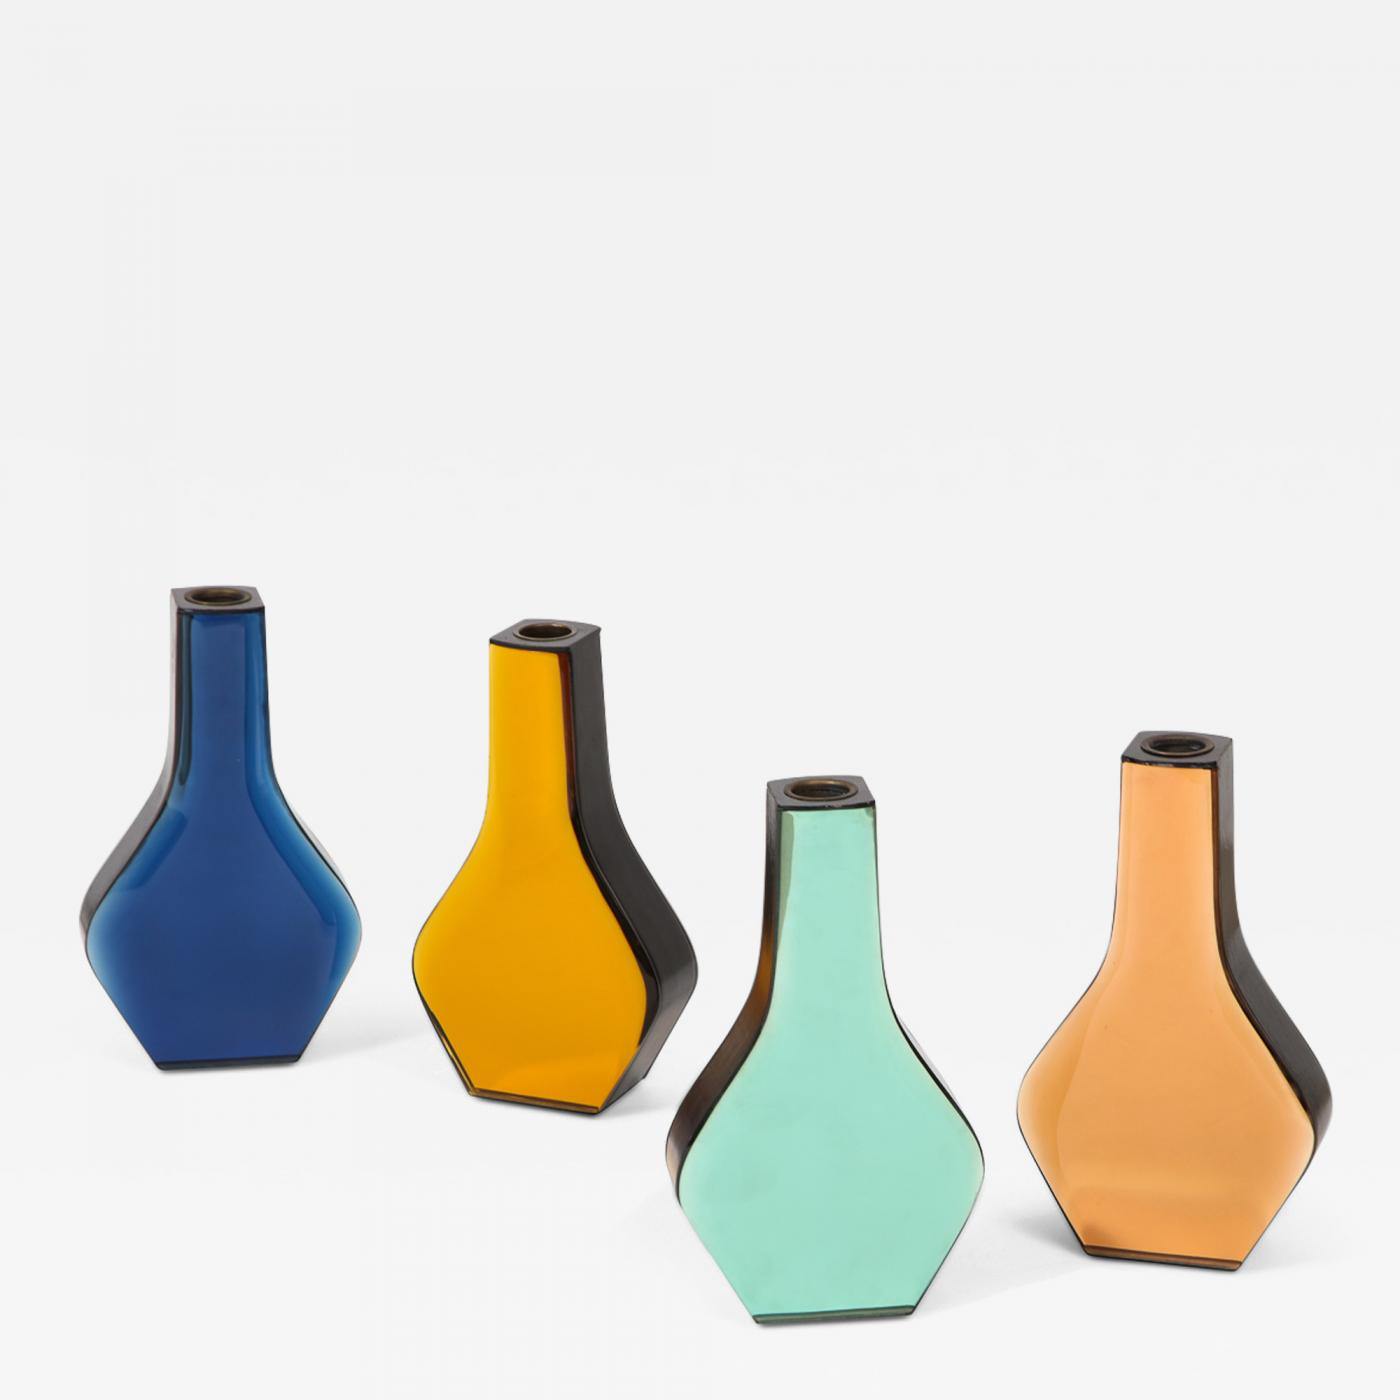 https://cdn.incollect.com/sites/default/files/zoom/Max-Ingrand-Rare-Colored-Glass-Vases-Model-No-2122-by-Max-Ingrand-for-Fontana-Arte-502992-2507002.jpg